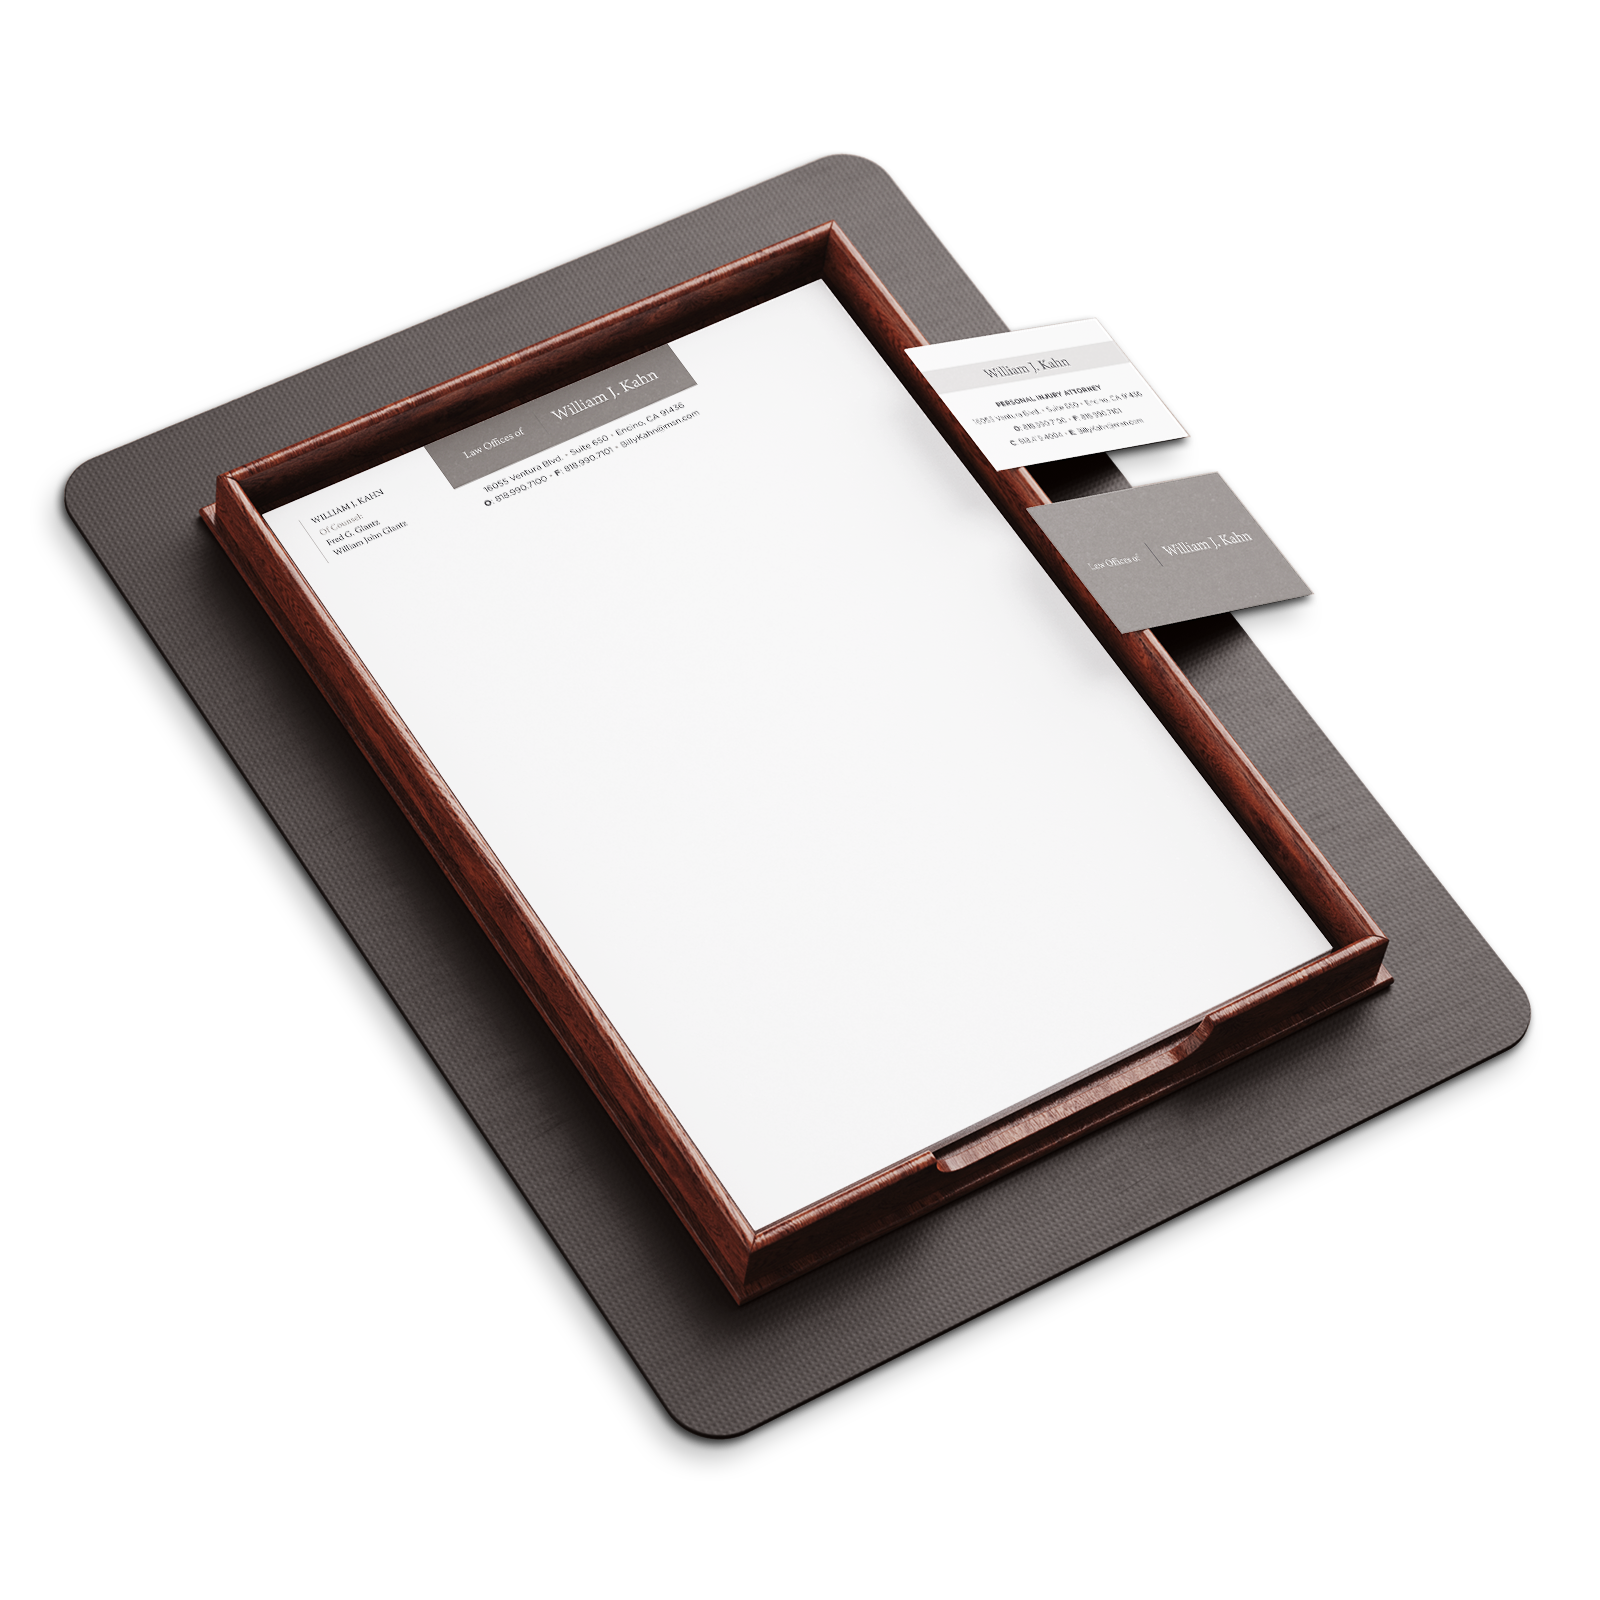 Law Offices of William Kahn Stationery Mockup